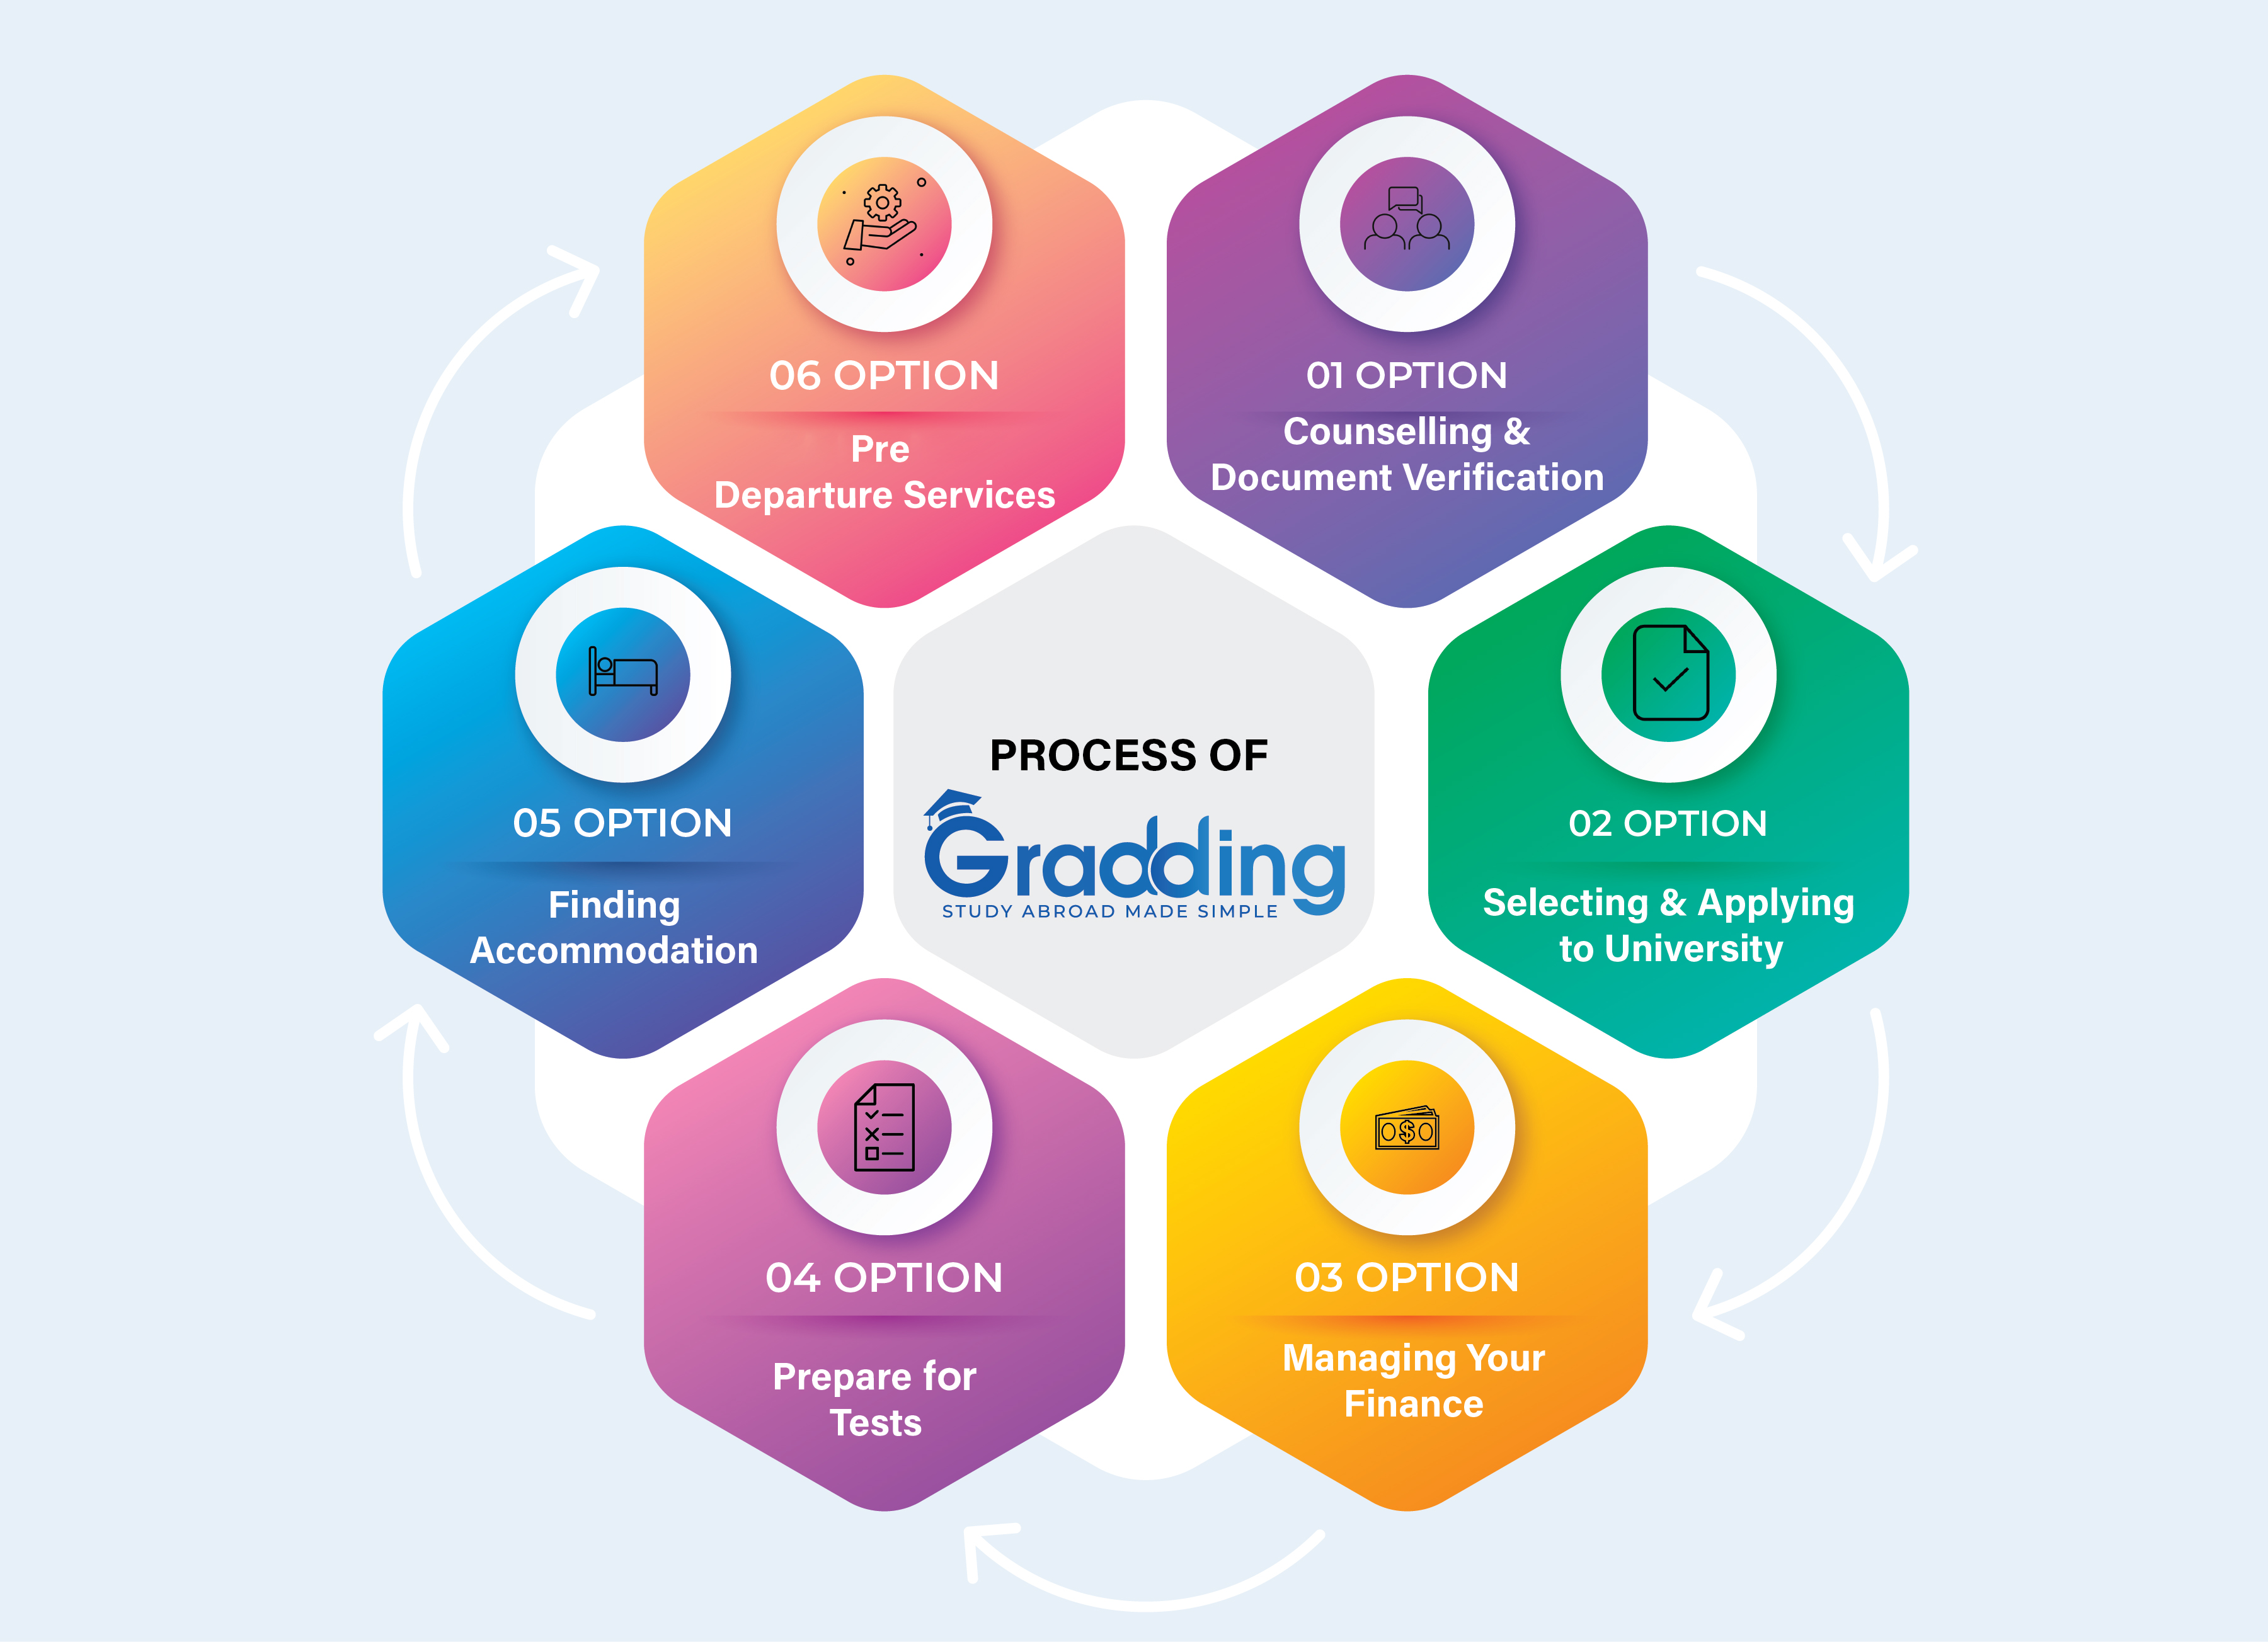 Know The Process of Gradding